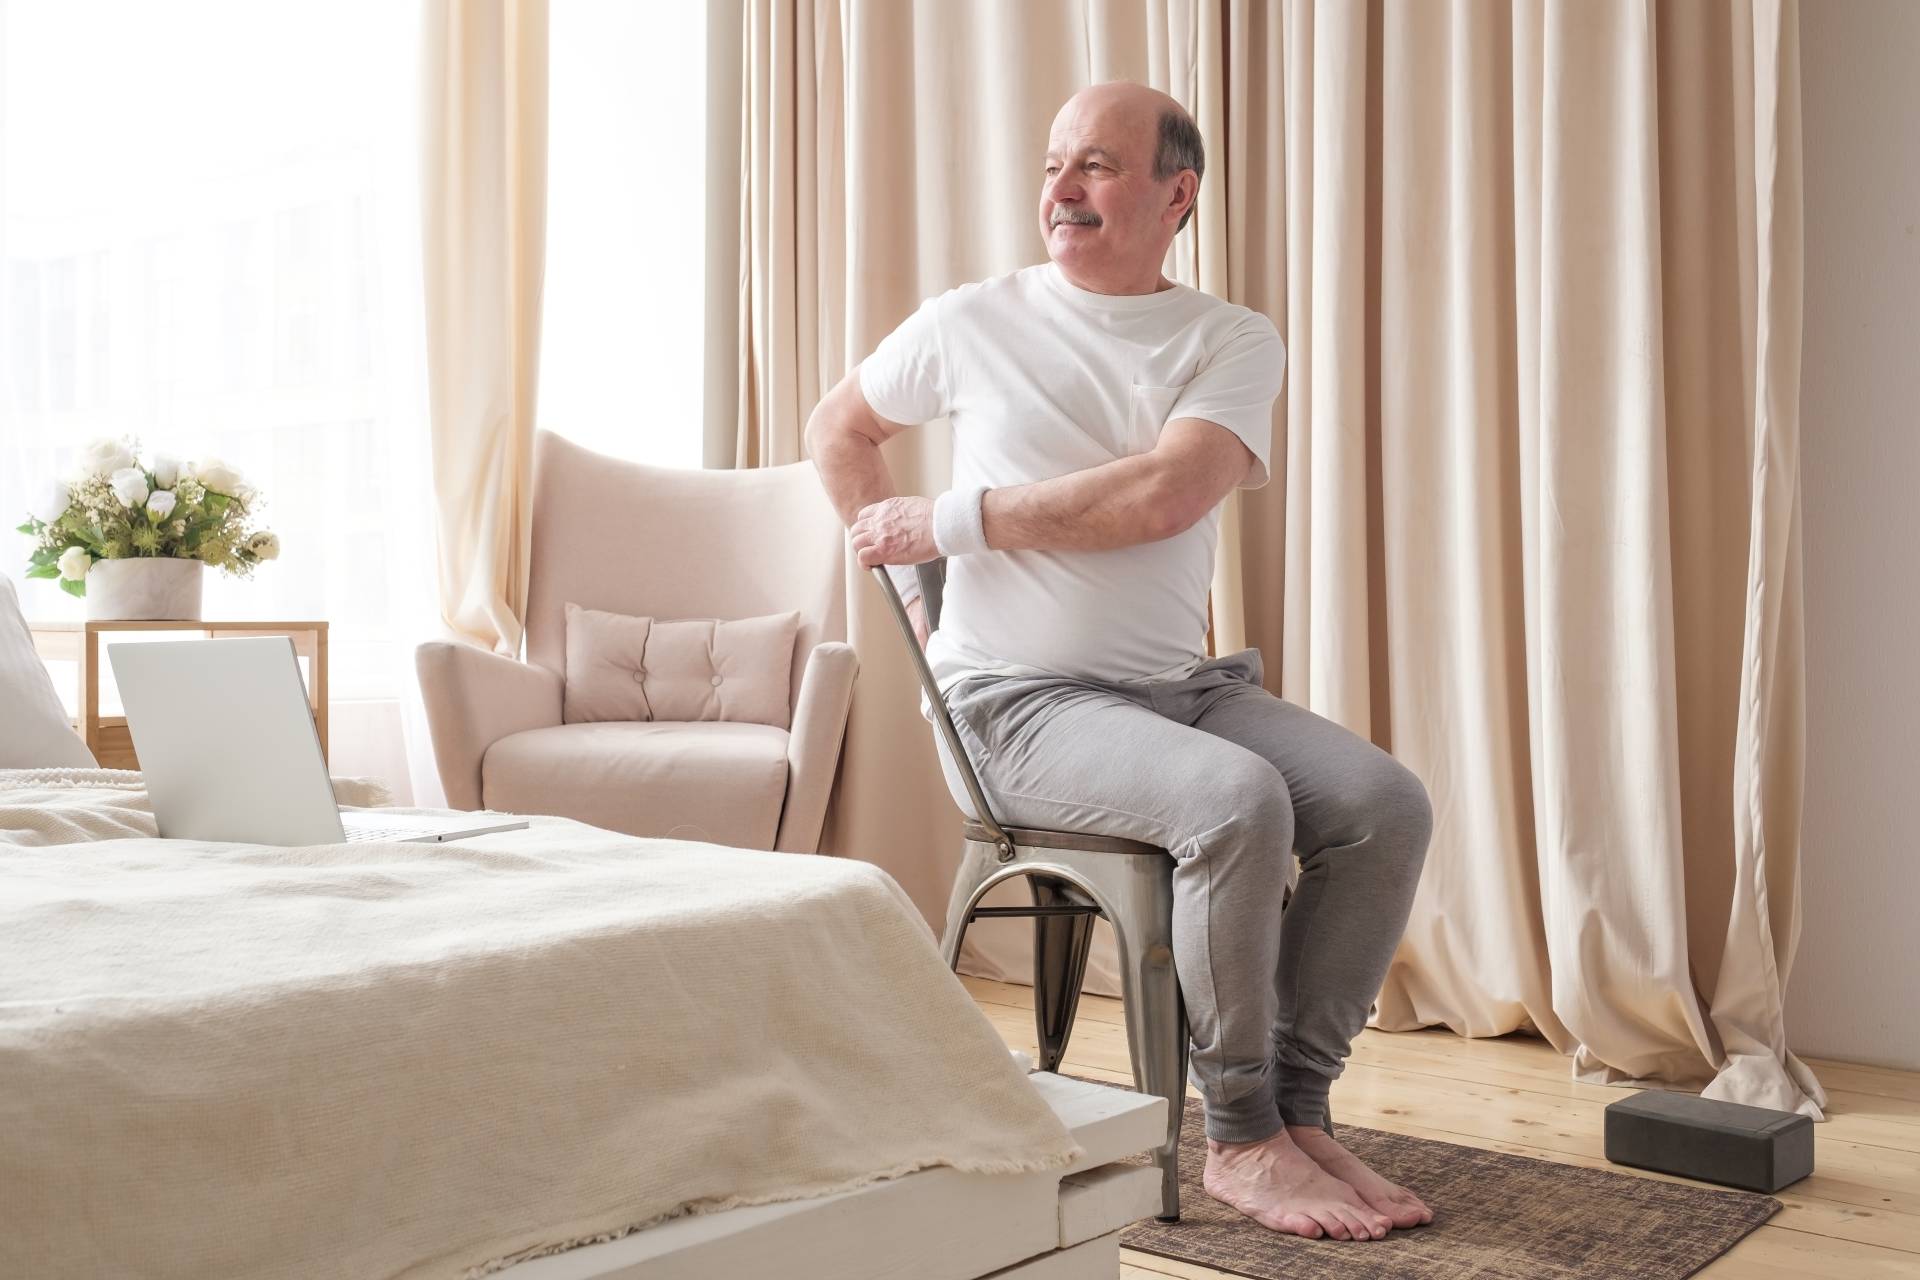 Senior man doing a seated abdominal twist in his bedroom.